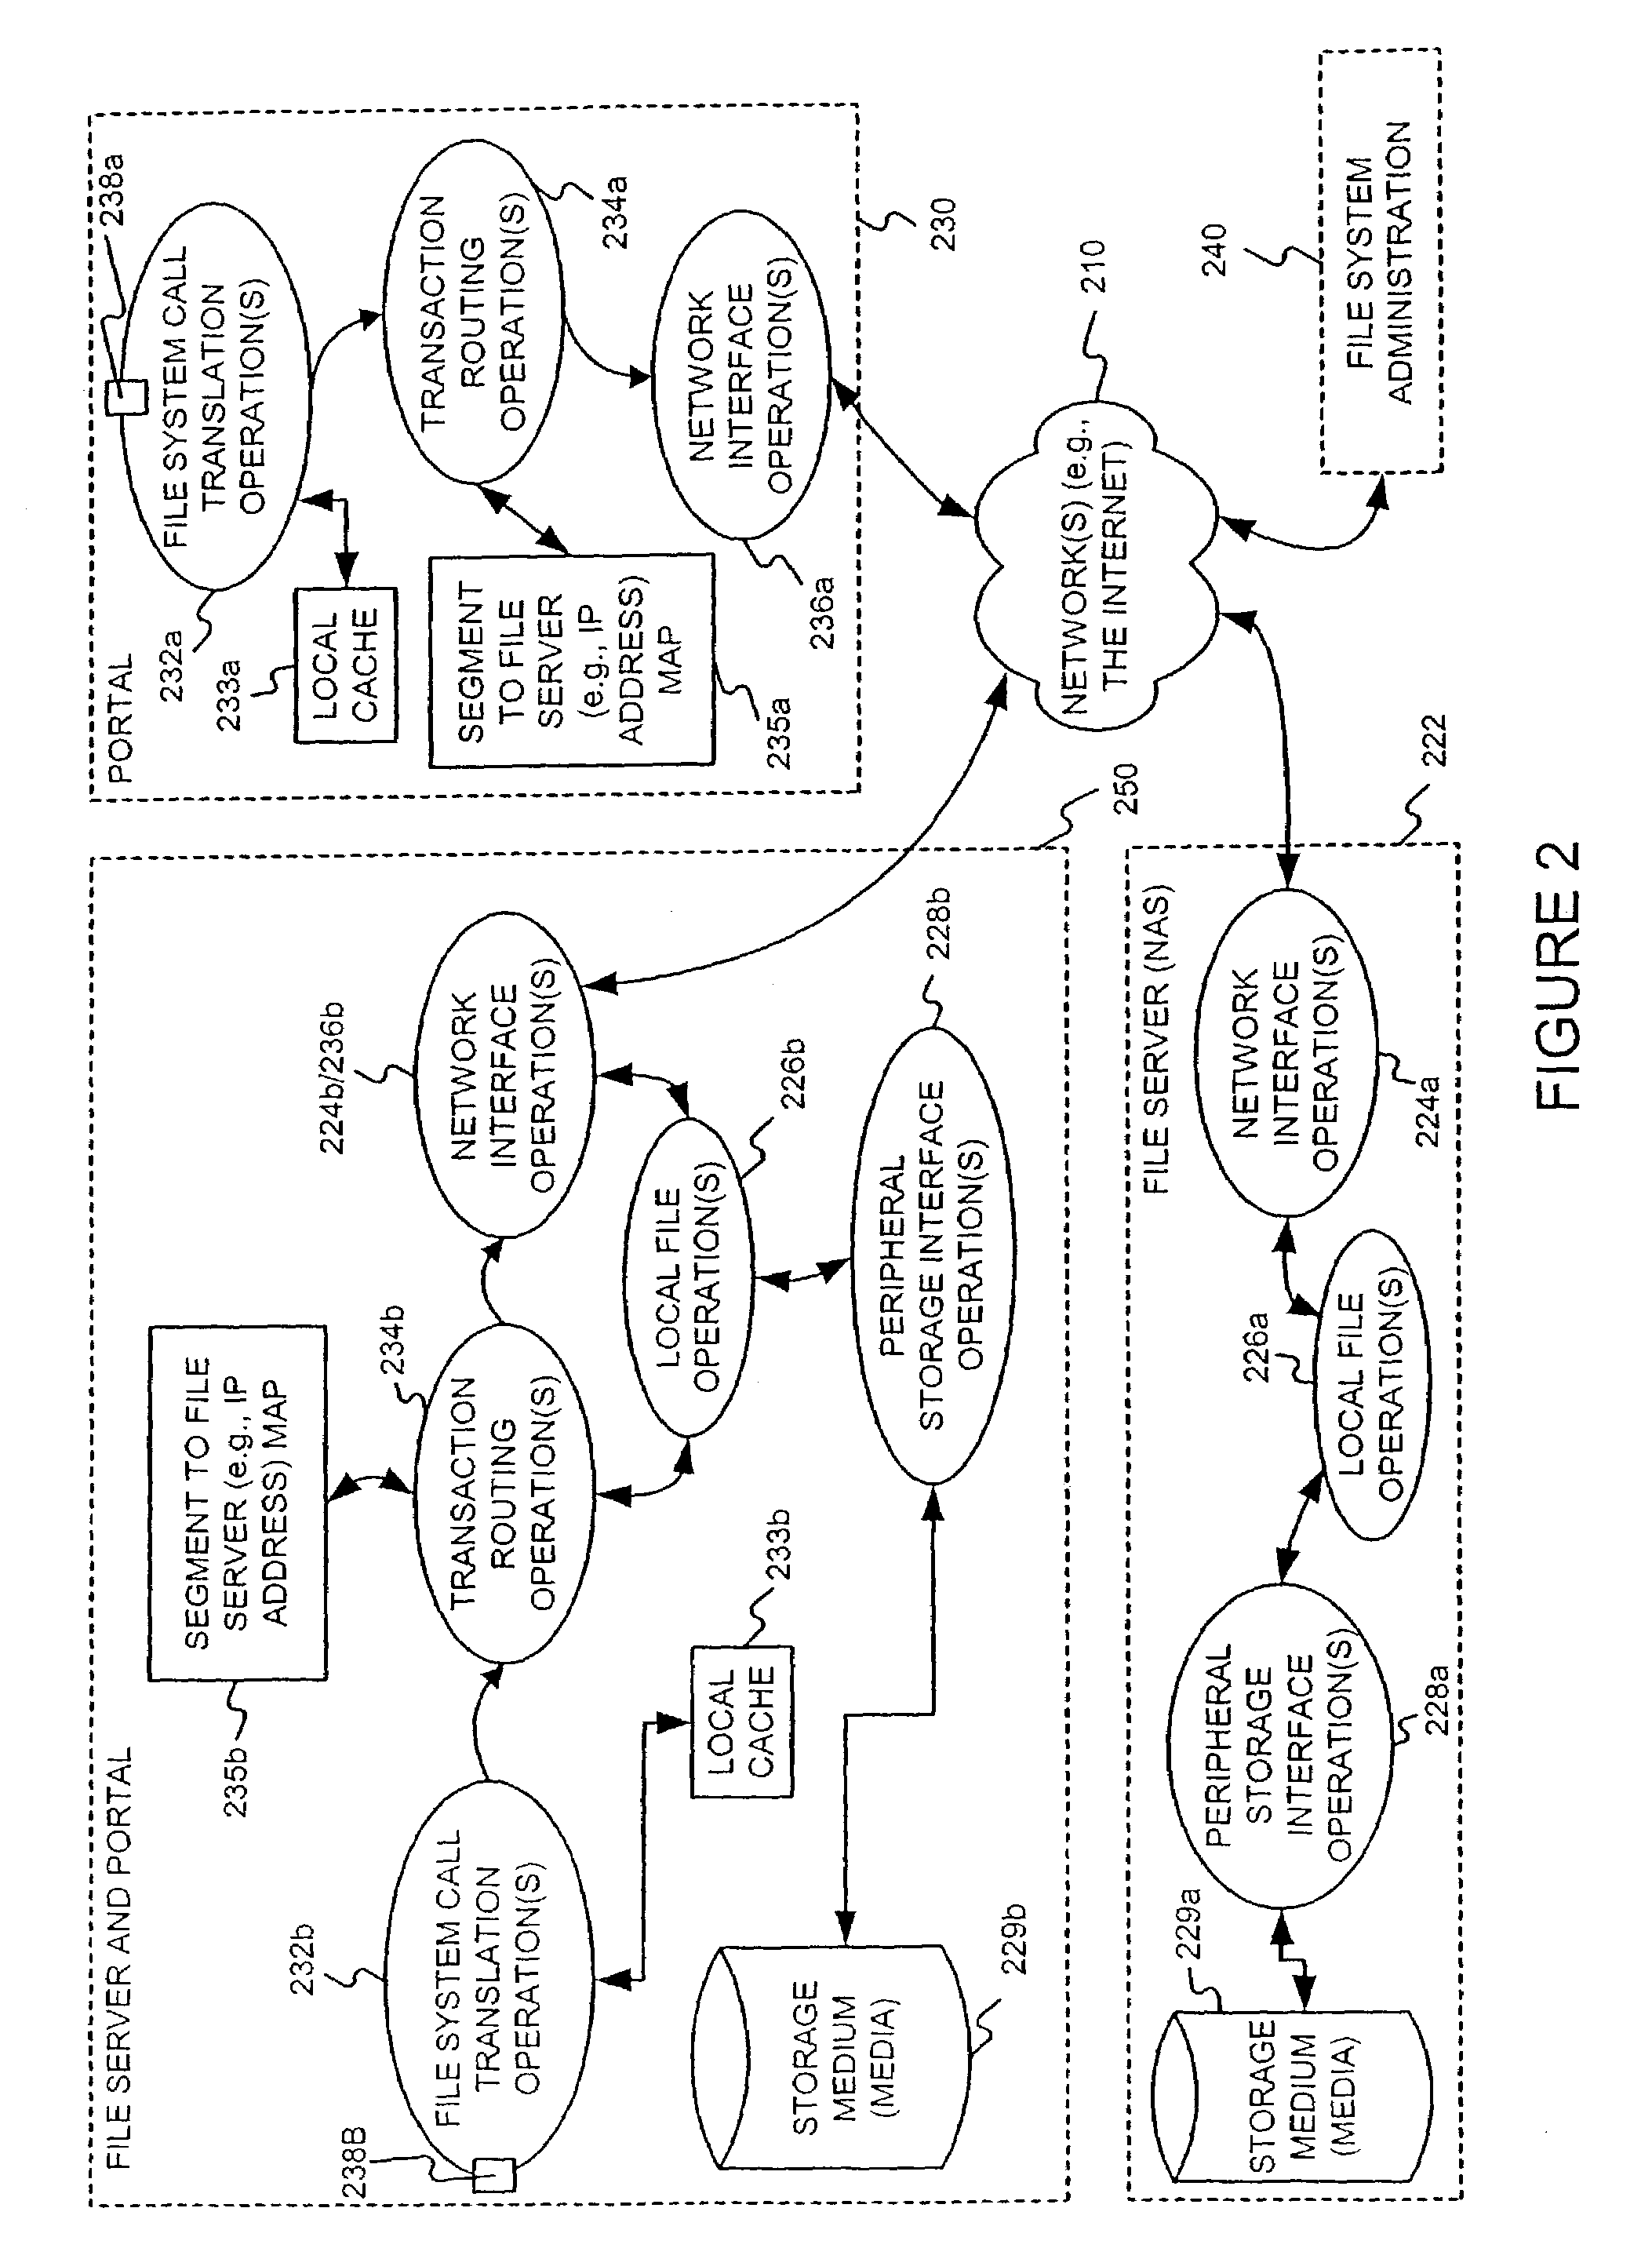 Storage allocation in a distributed segmented file system